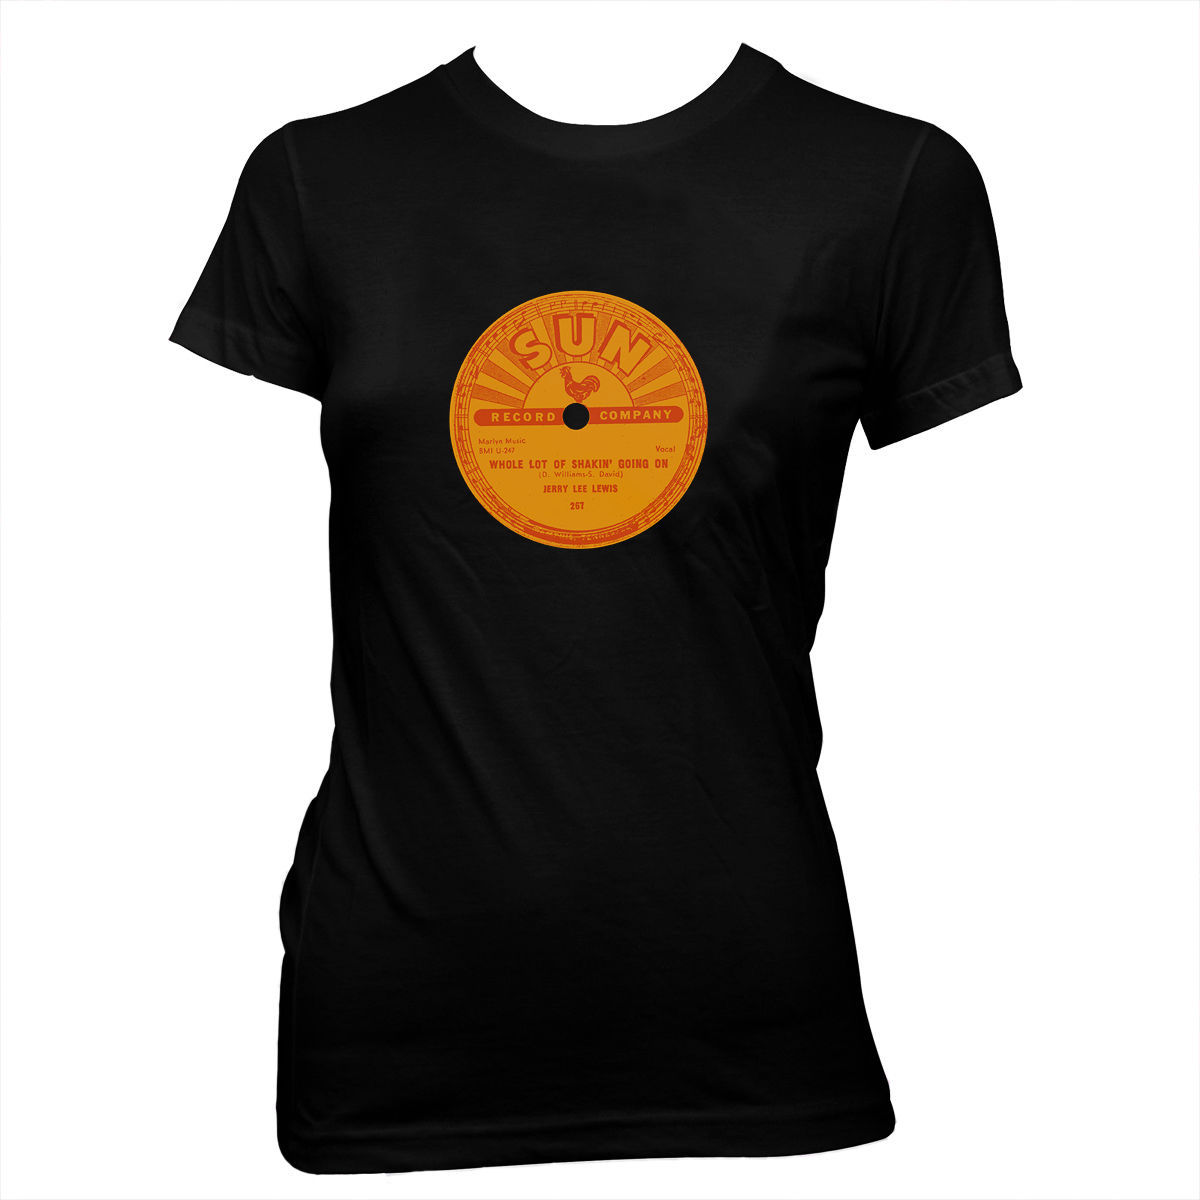 Sun Records Label - Jerry Lee Lewis - Hand screened, Pre-shrunk, Women's T-Shirt